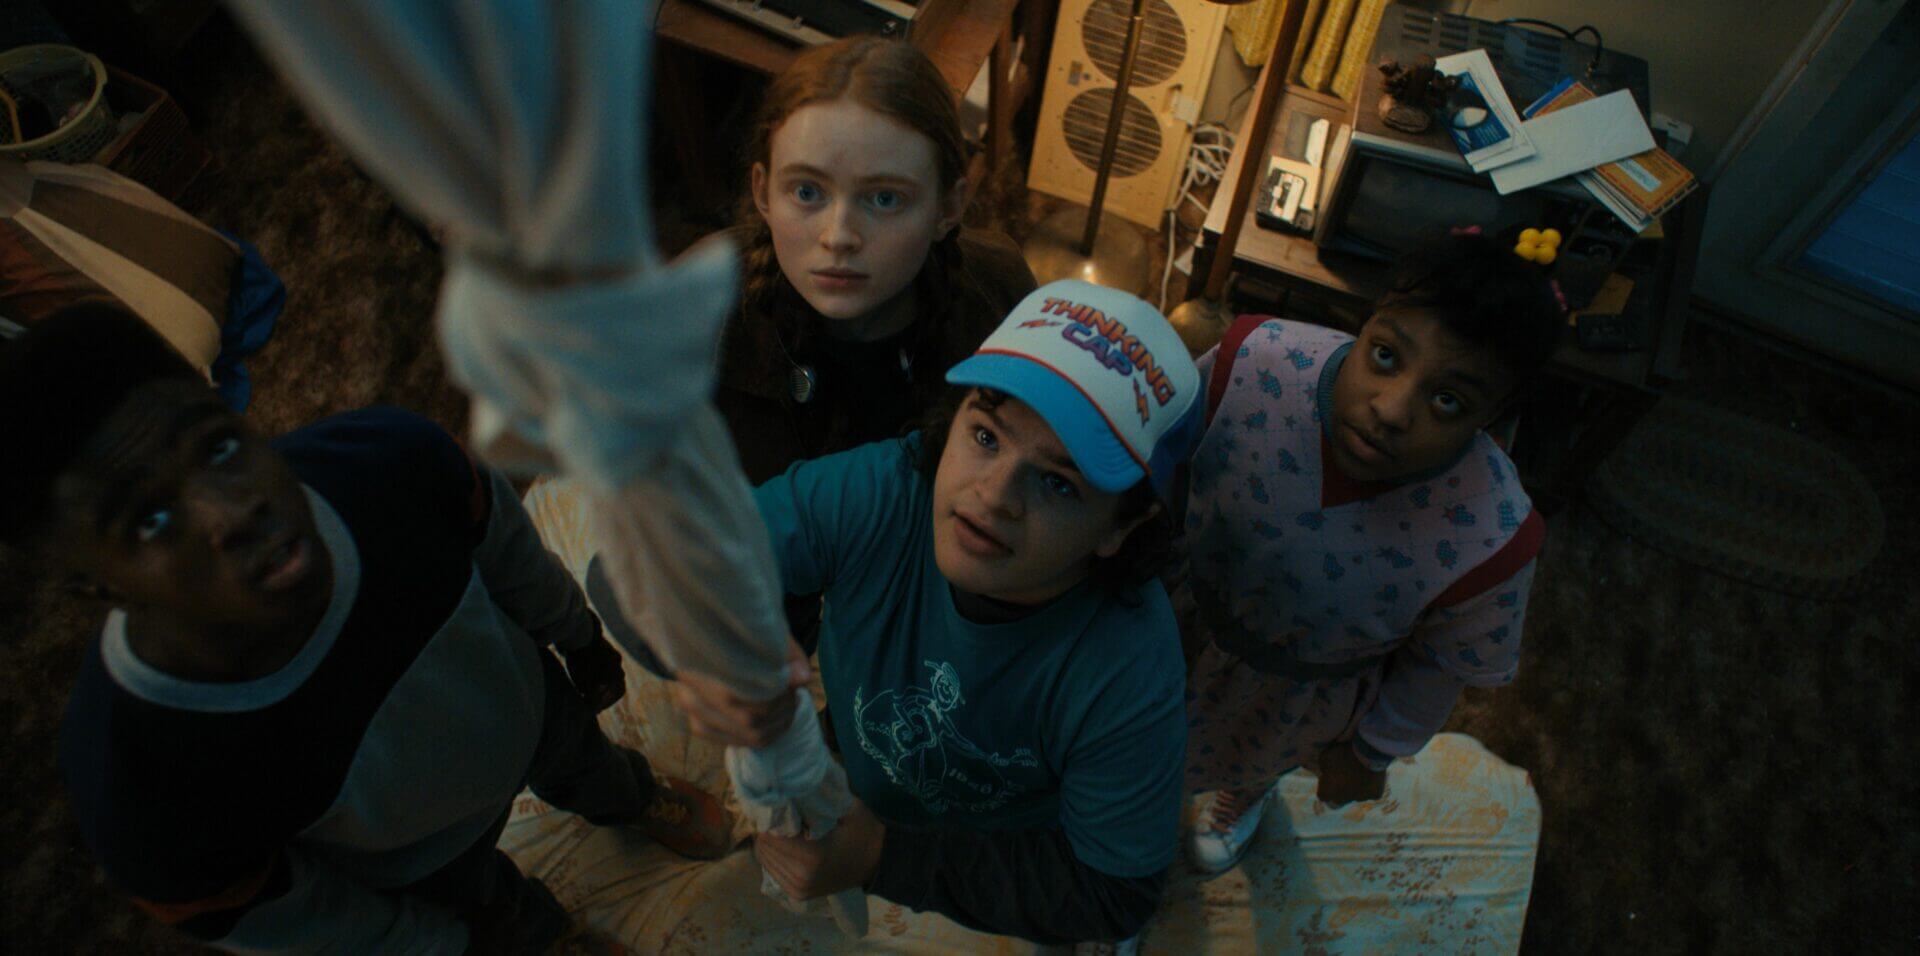 Stranger-Things-4-episode-10-won't-happen-but-more-are-coming